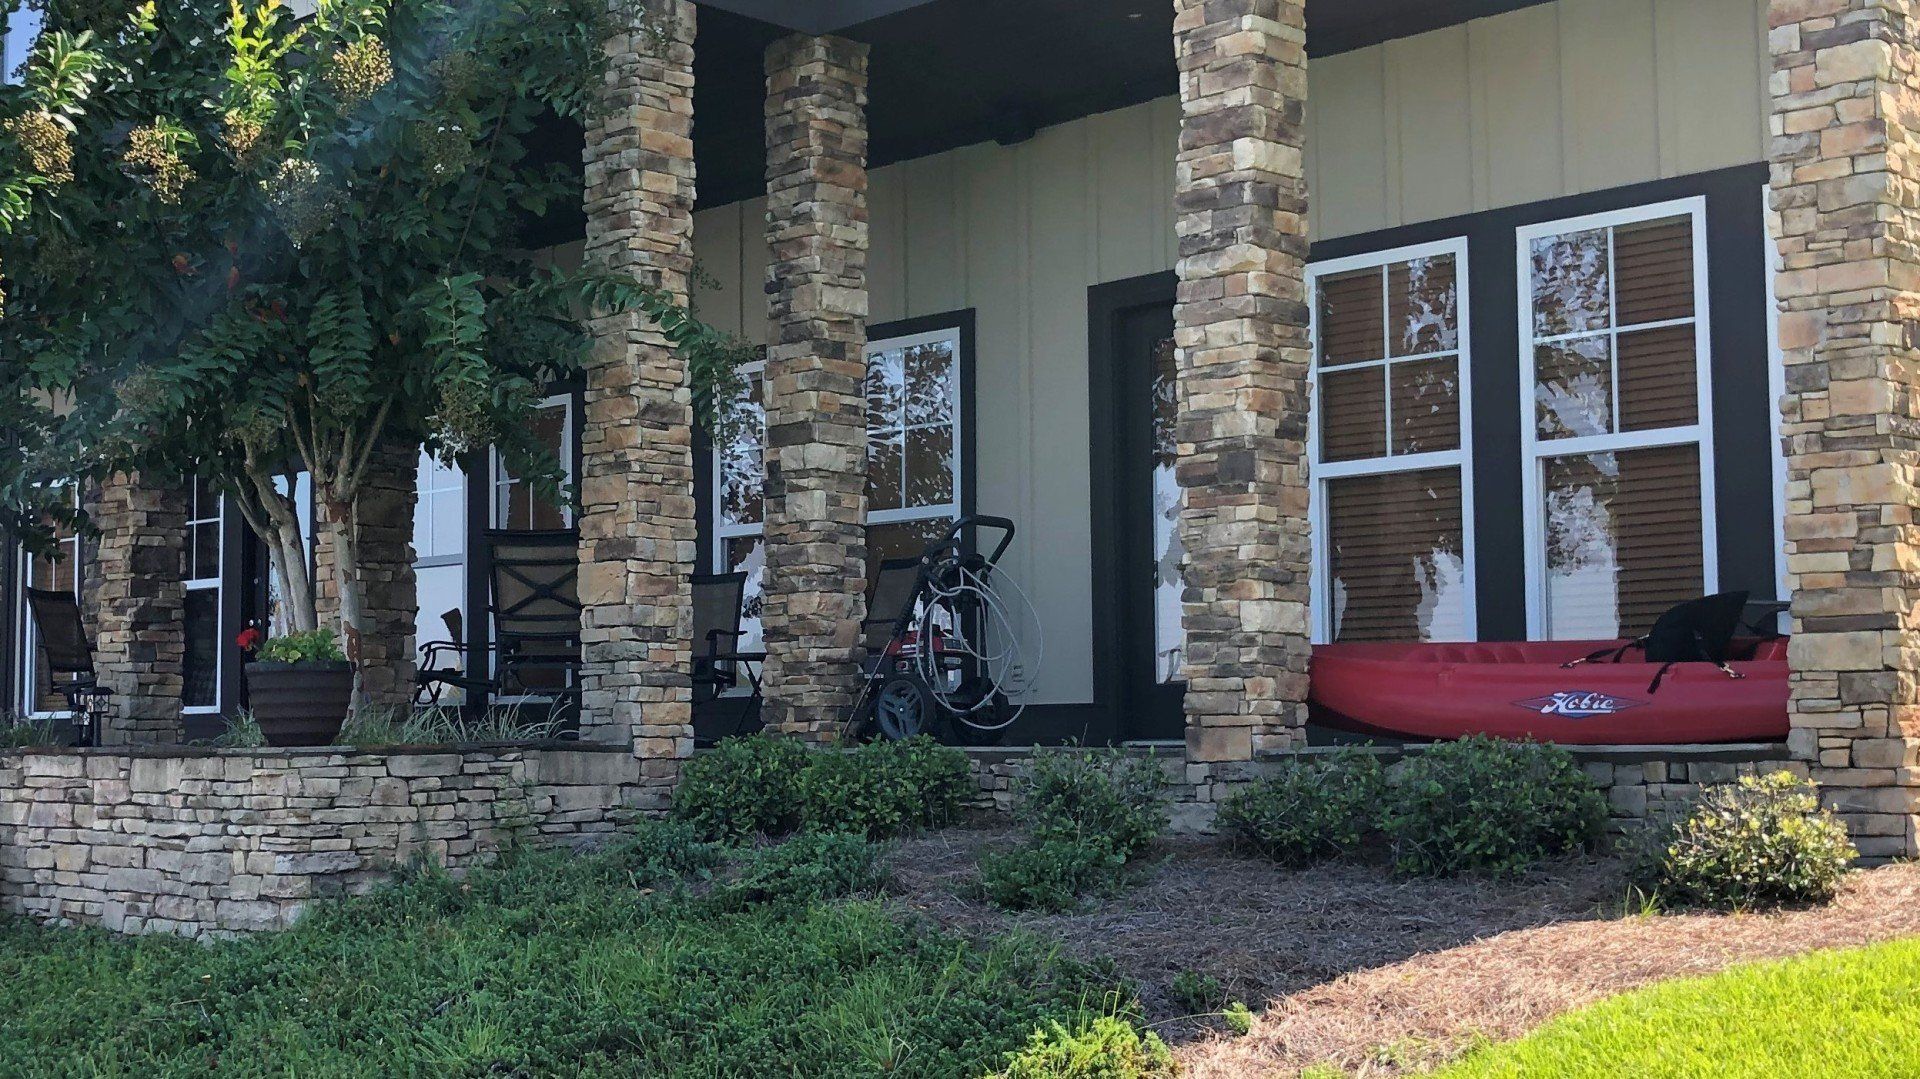 residential tint installation in Central AL - Home windows were letting in too much heat, disrupting the climate consistency inside. Fall-2019